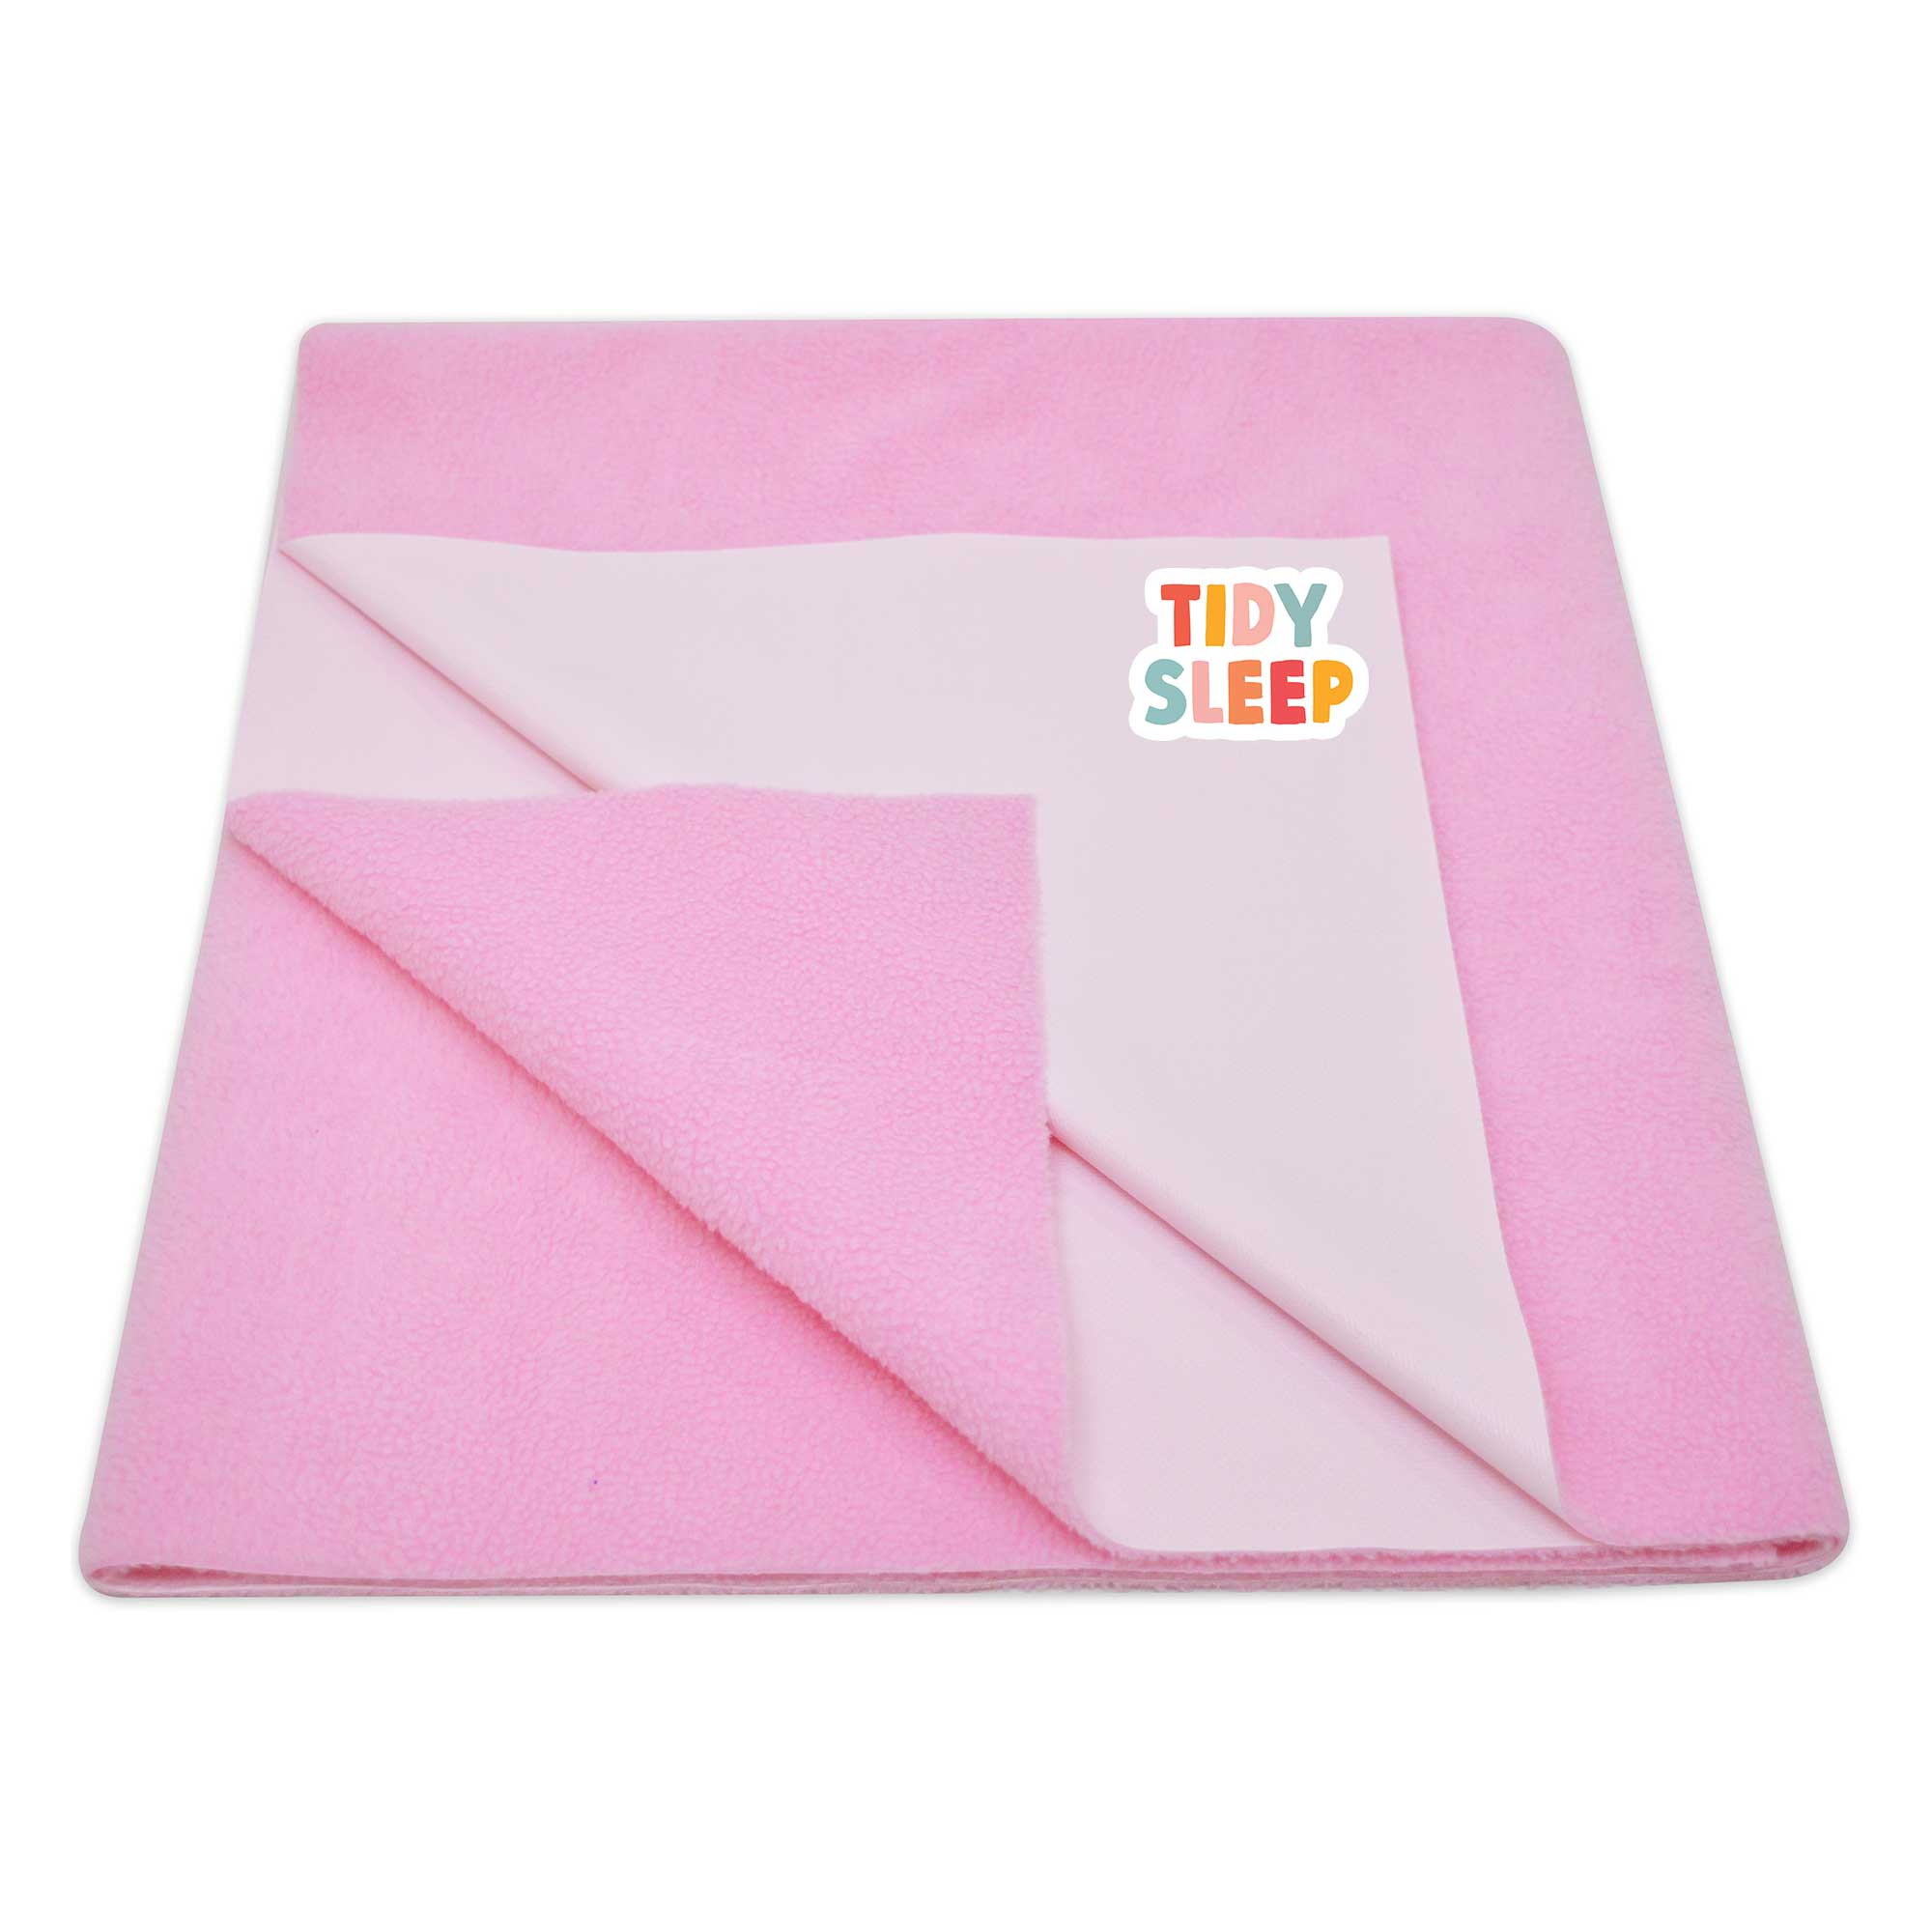 Tidy Sleep Waterproof Baby Bed Protector Dry Sheet for New Born Babies Baby Pink